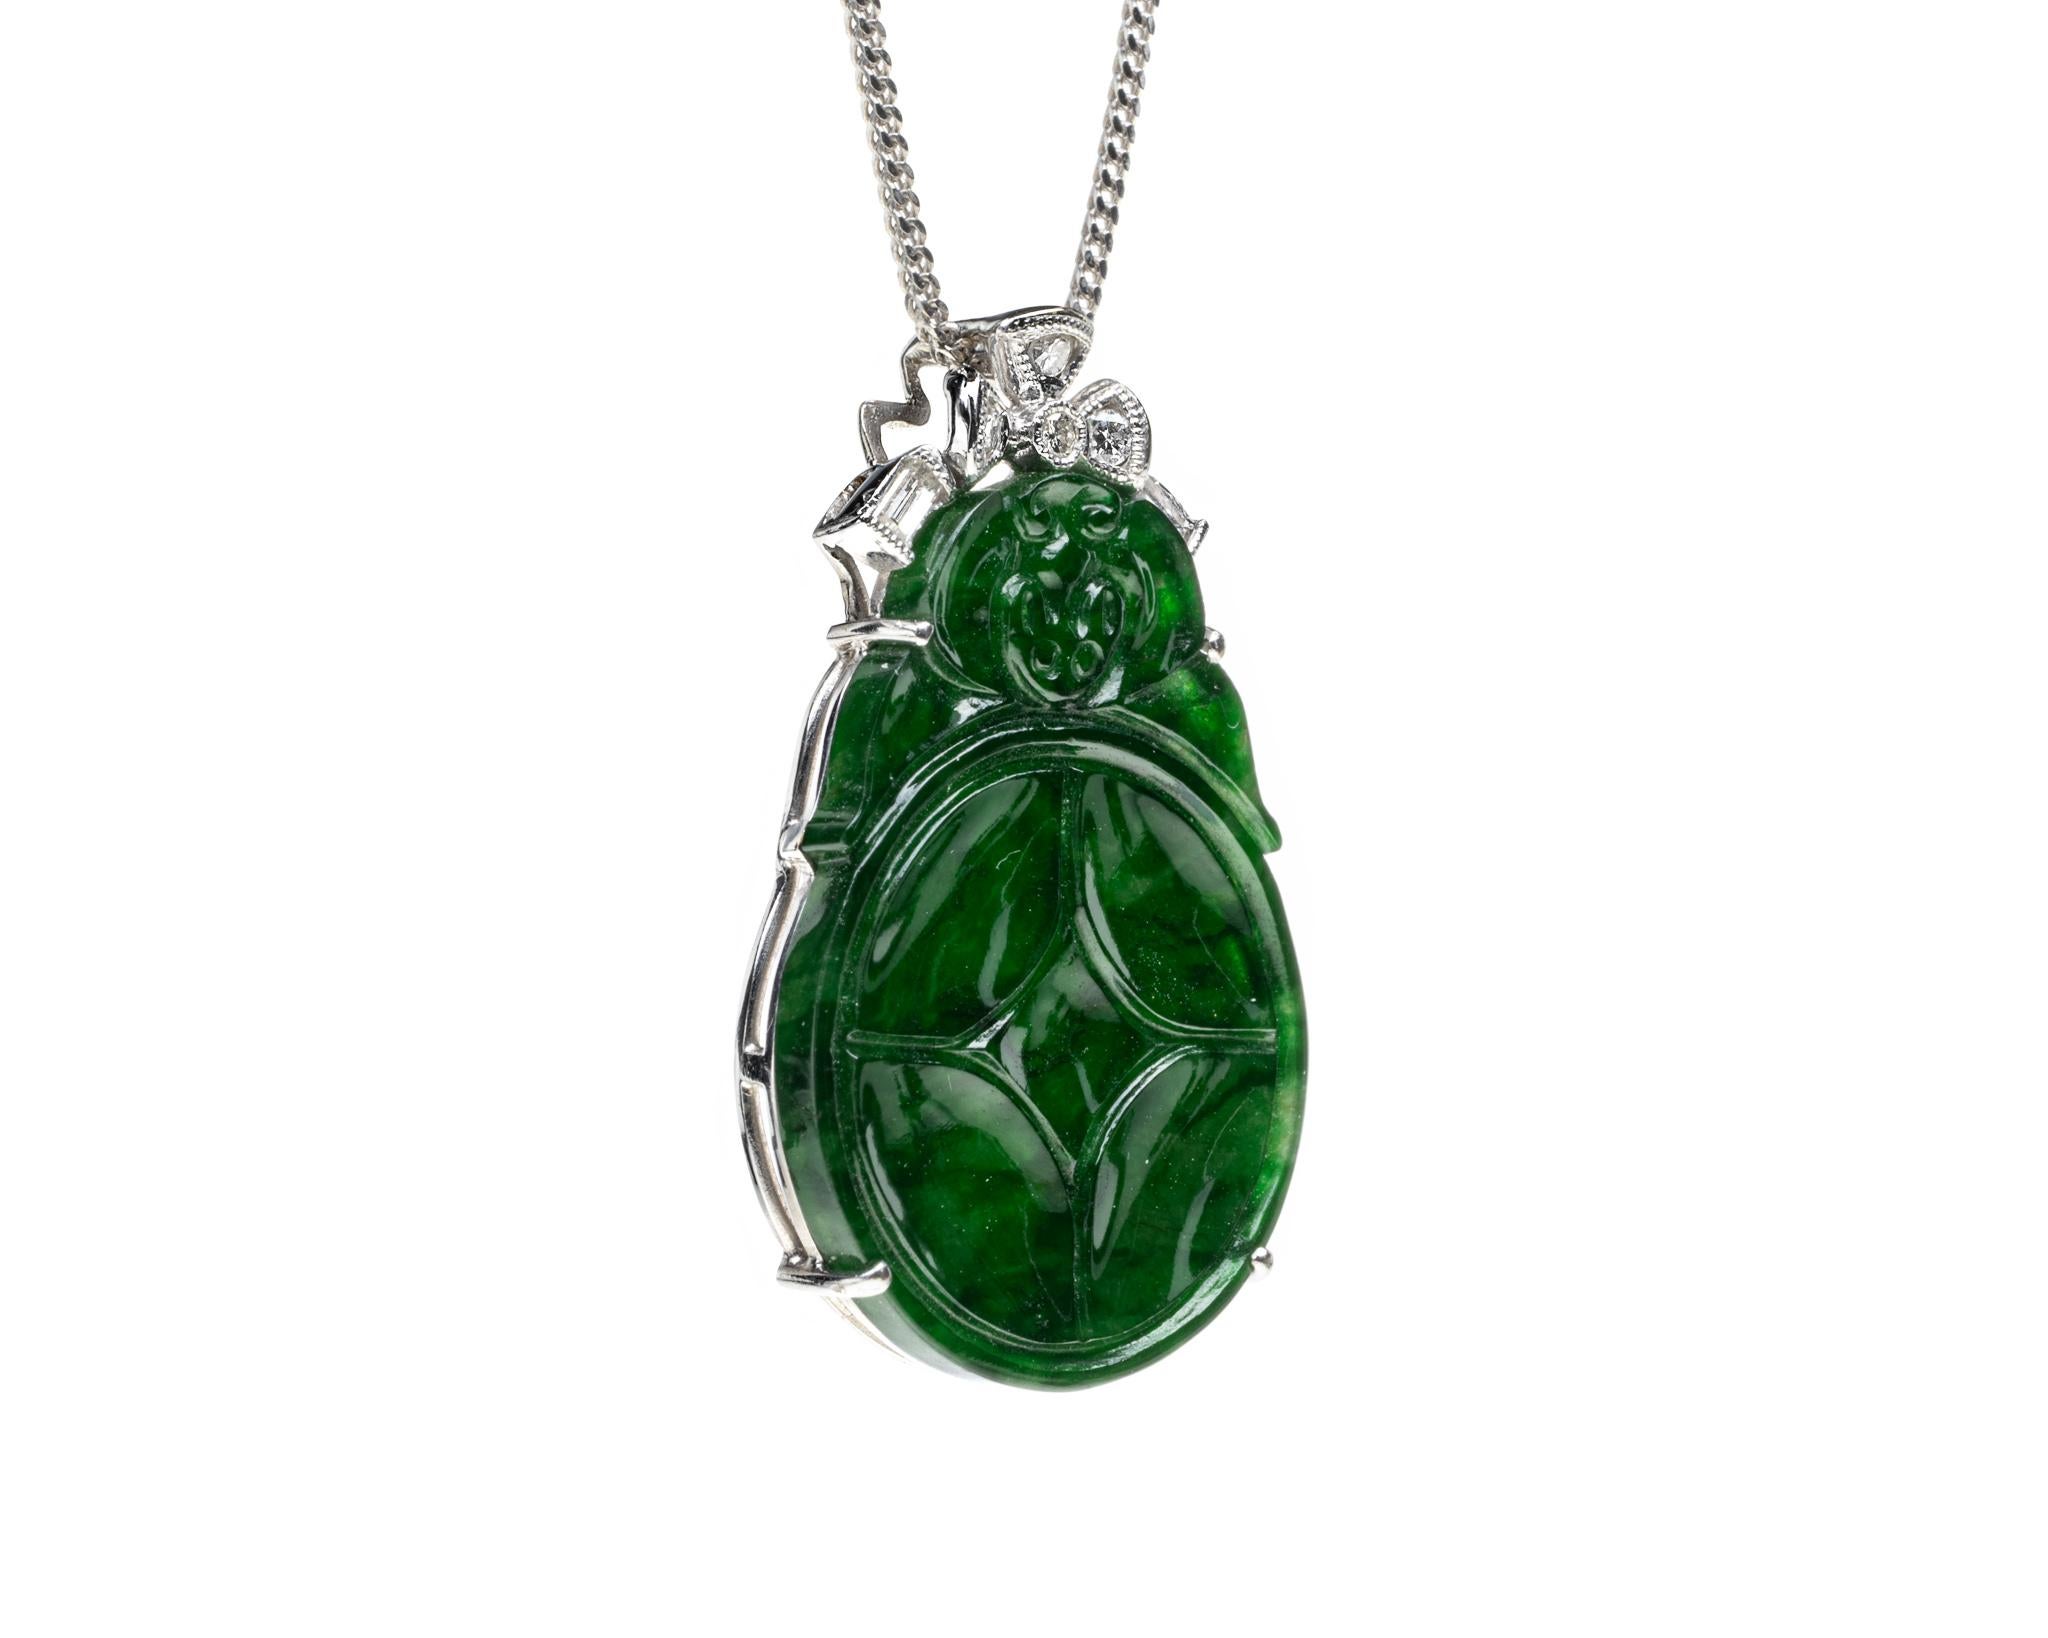 This is an all natural, untreated jadeite jade carved coin pendant set on an 18K white gold and diamond bail.  The carved coin symbolizes money, wealth and prosperity.
   
It measures 1.28 inches (32.5 mm) x 0.79 inches (20.2 mm) with thickness of